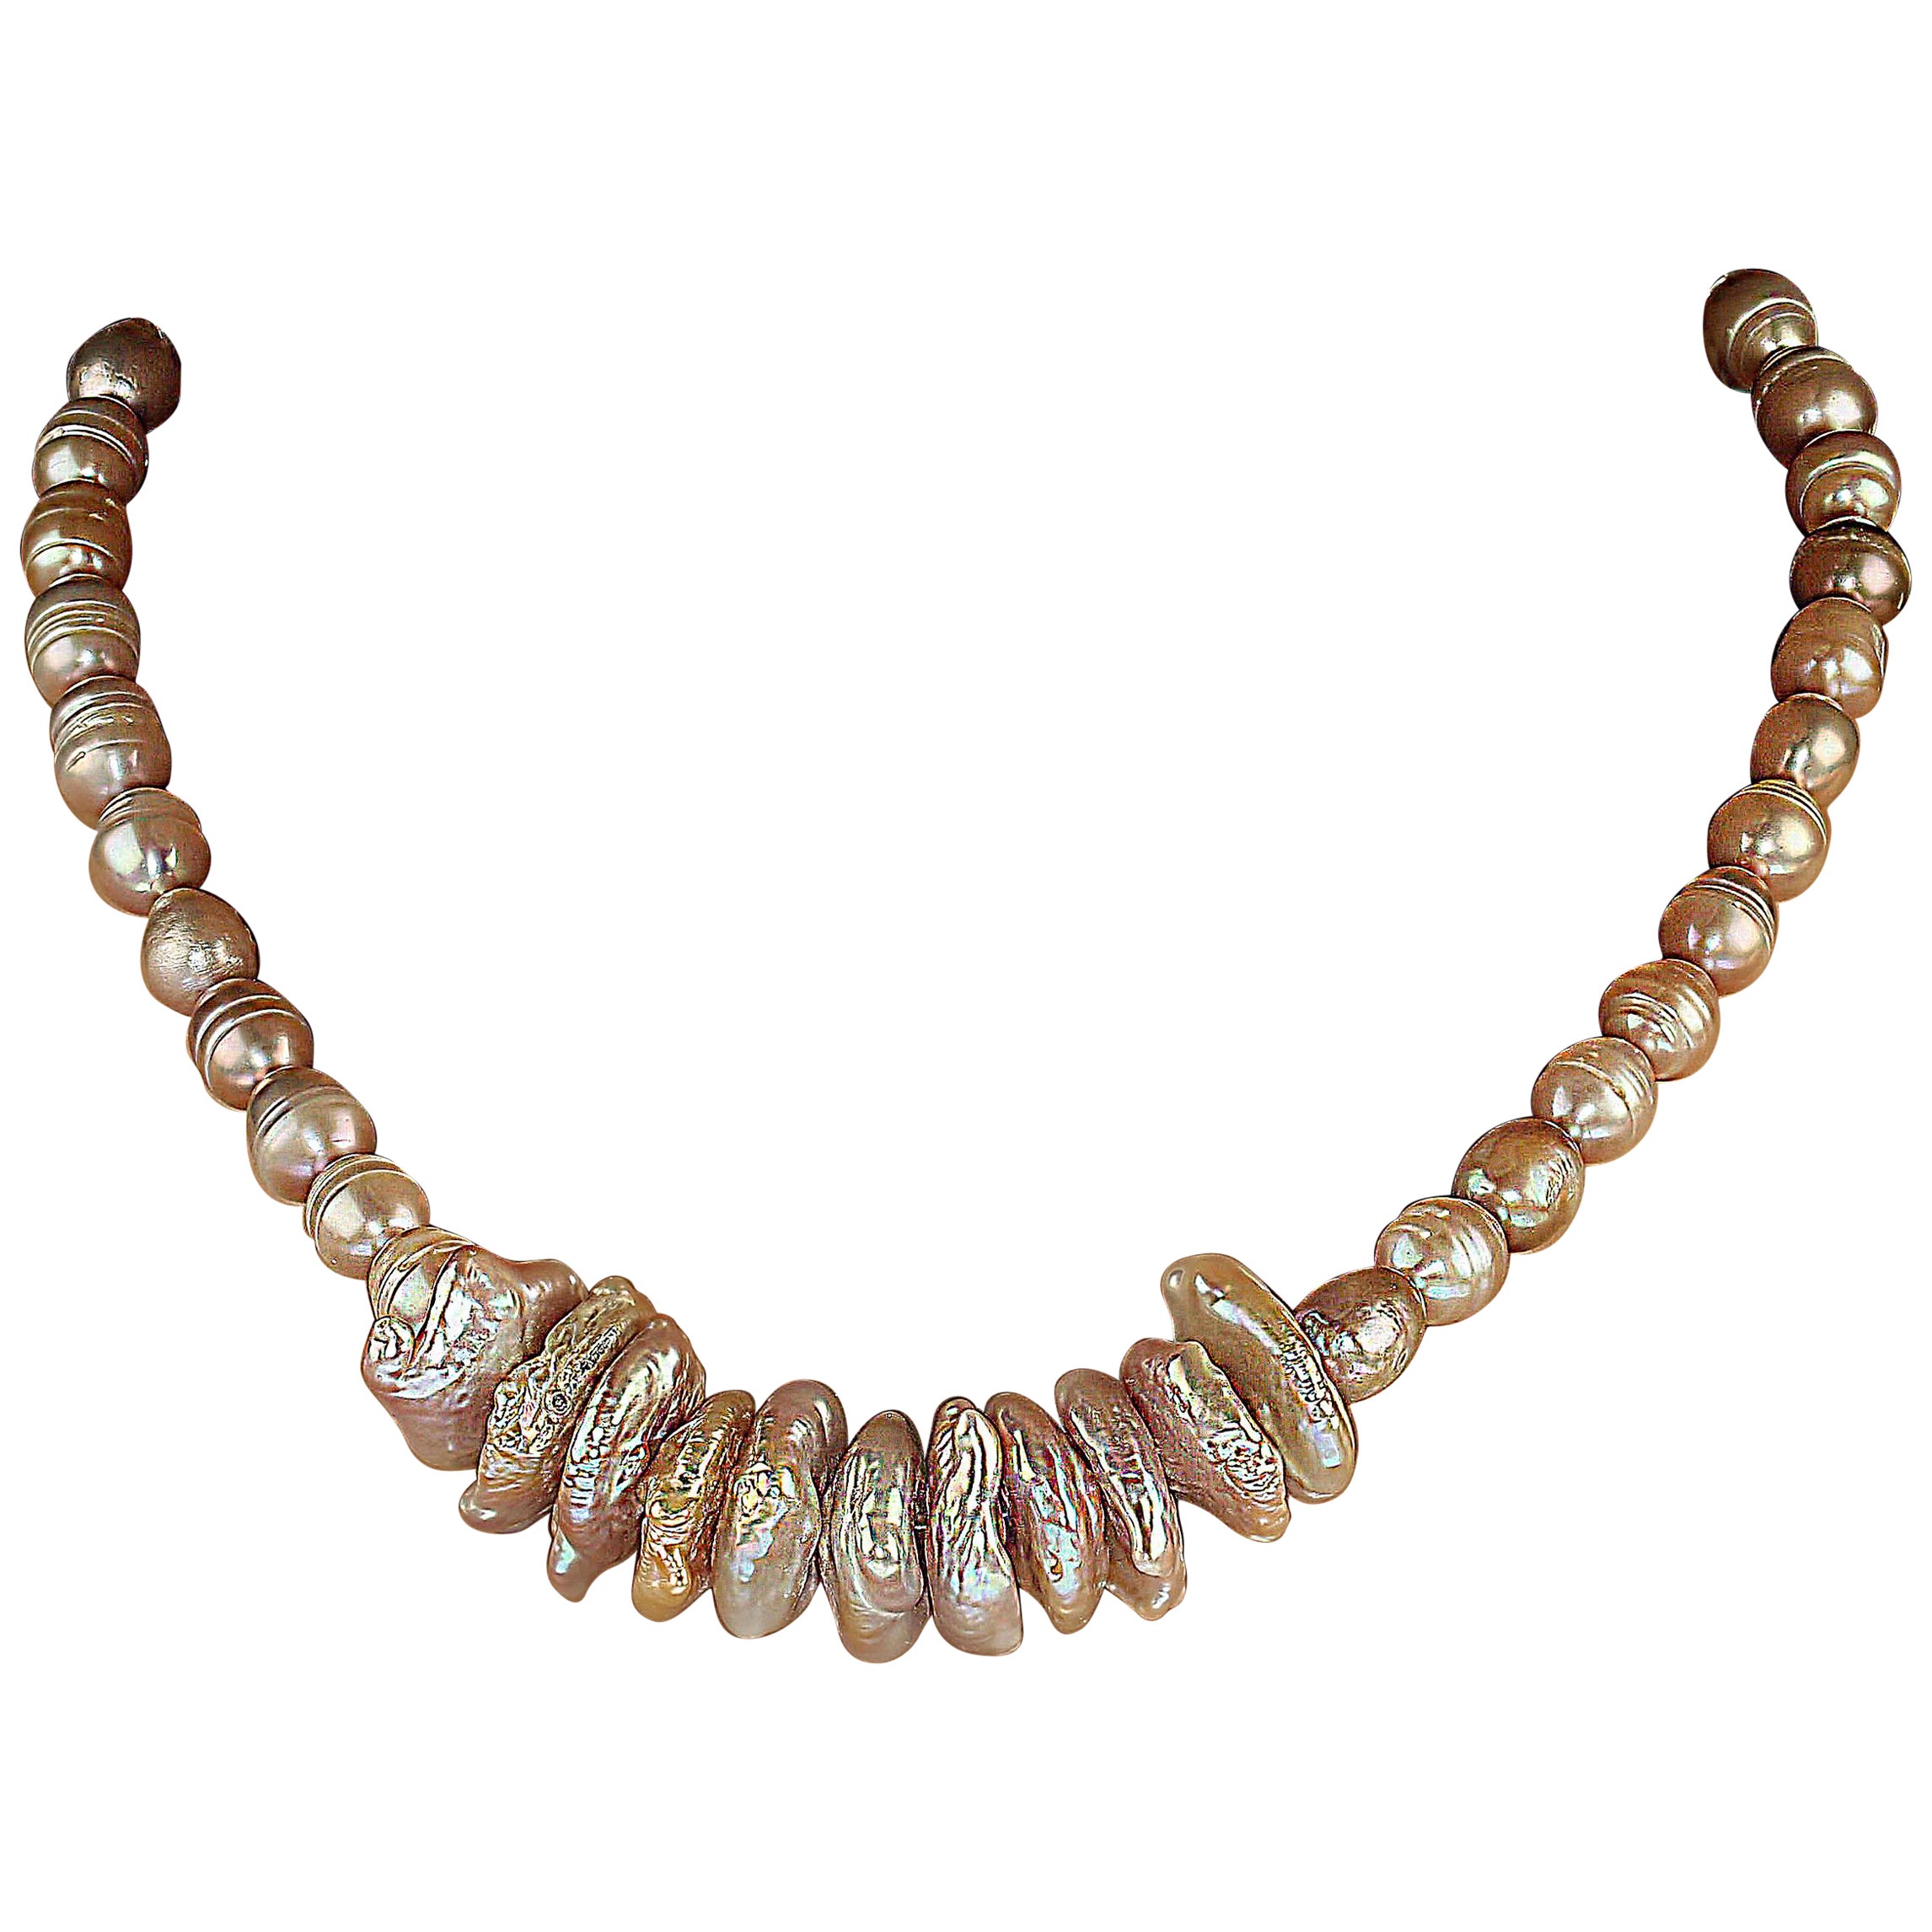 18-Inch elegant pearl necklace of mauvy/pink potato pearls with three inches of center drilled coin pearls across the center front of the necklace. This is the perfect necklace for day and evening wear.  It features an easy to use 'S' clasp.  MN2437